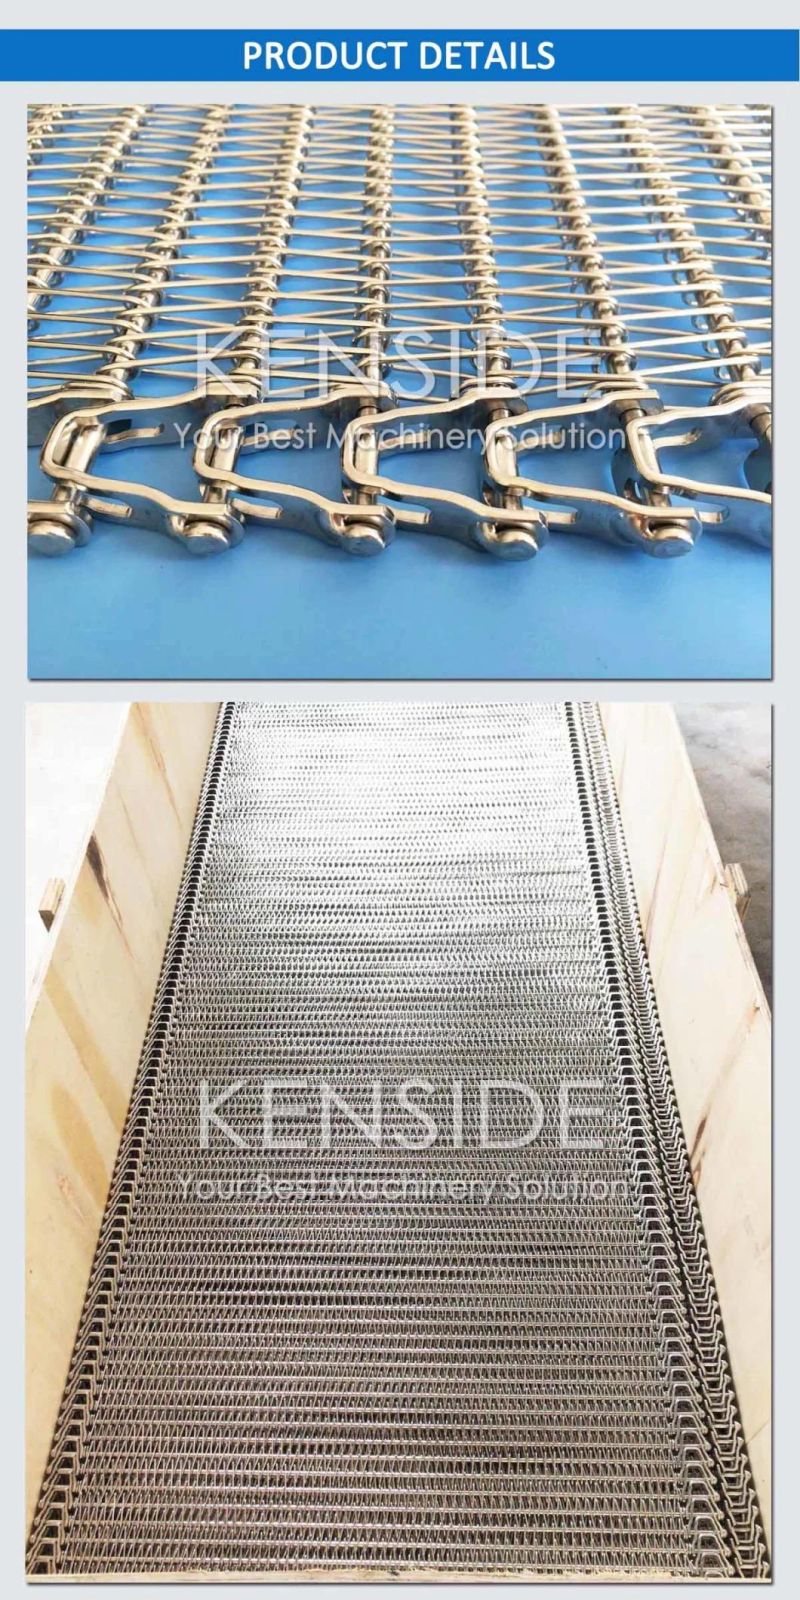 Stainless Steel Belting Spiral Conveyor Belts Reduced Radius Belts for Spiral Coolers, Spiral Freezers, Spiral Proofers